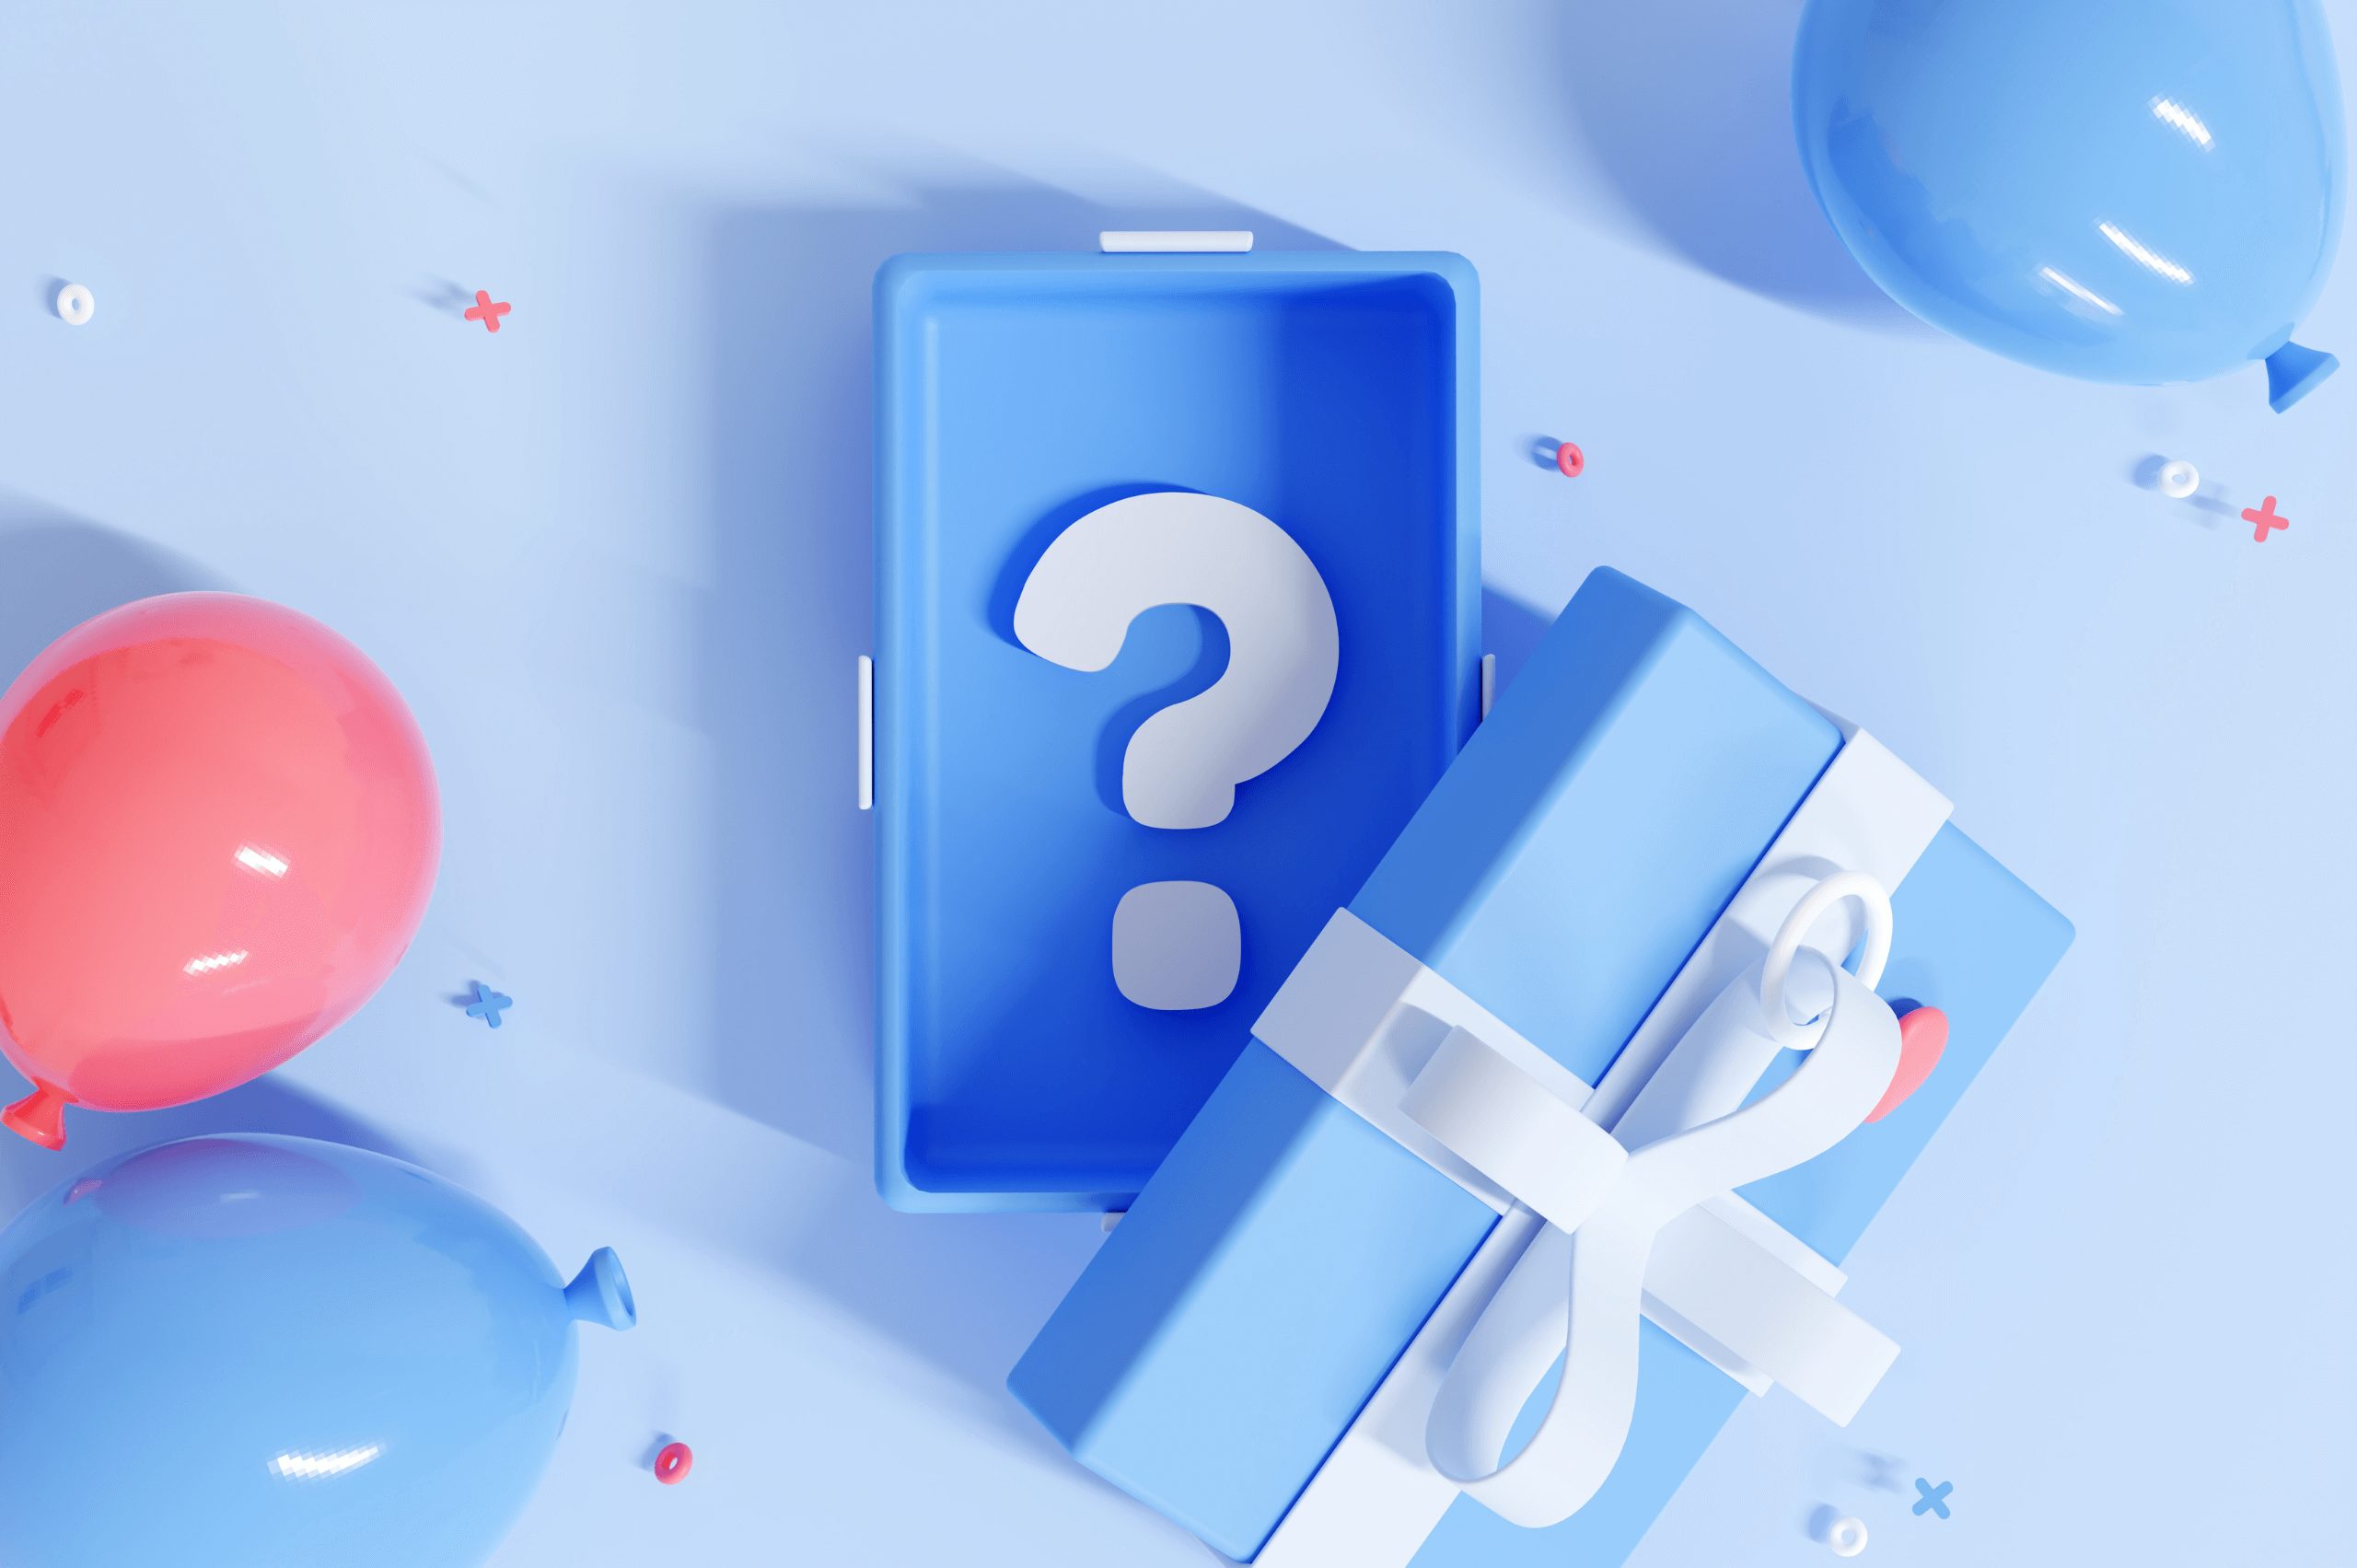 A social media giveaway half-open blue mystery box with a question mark inside it